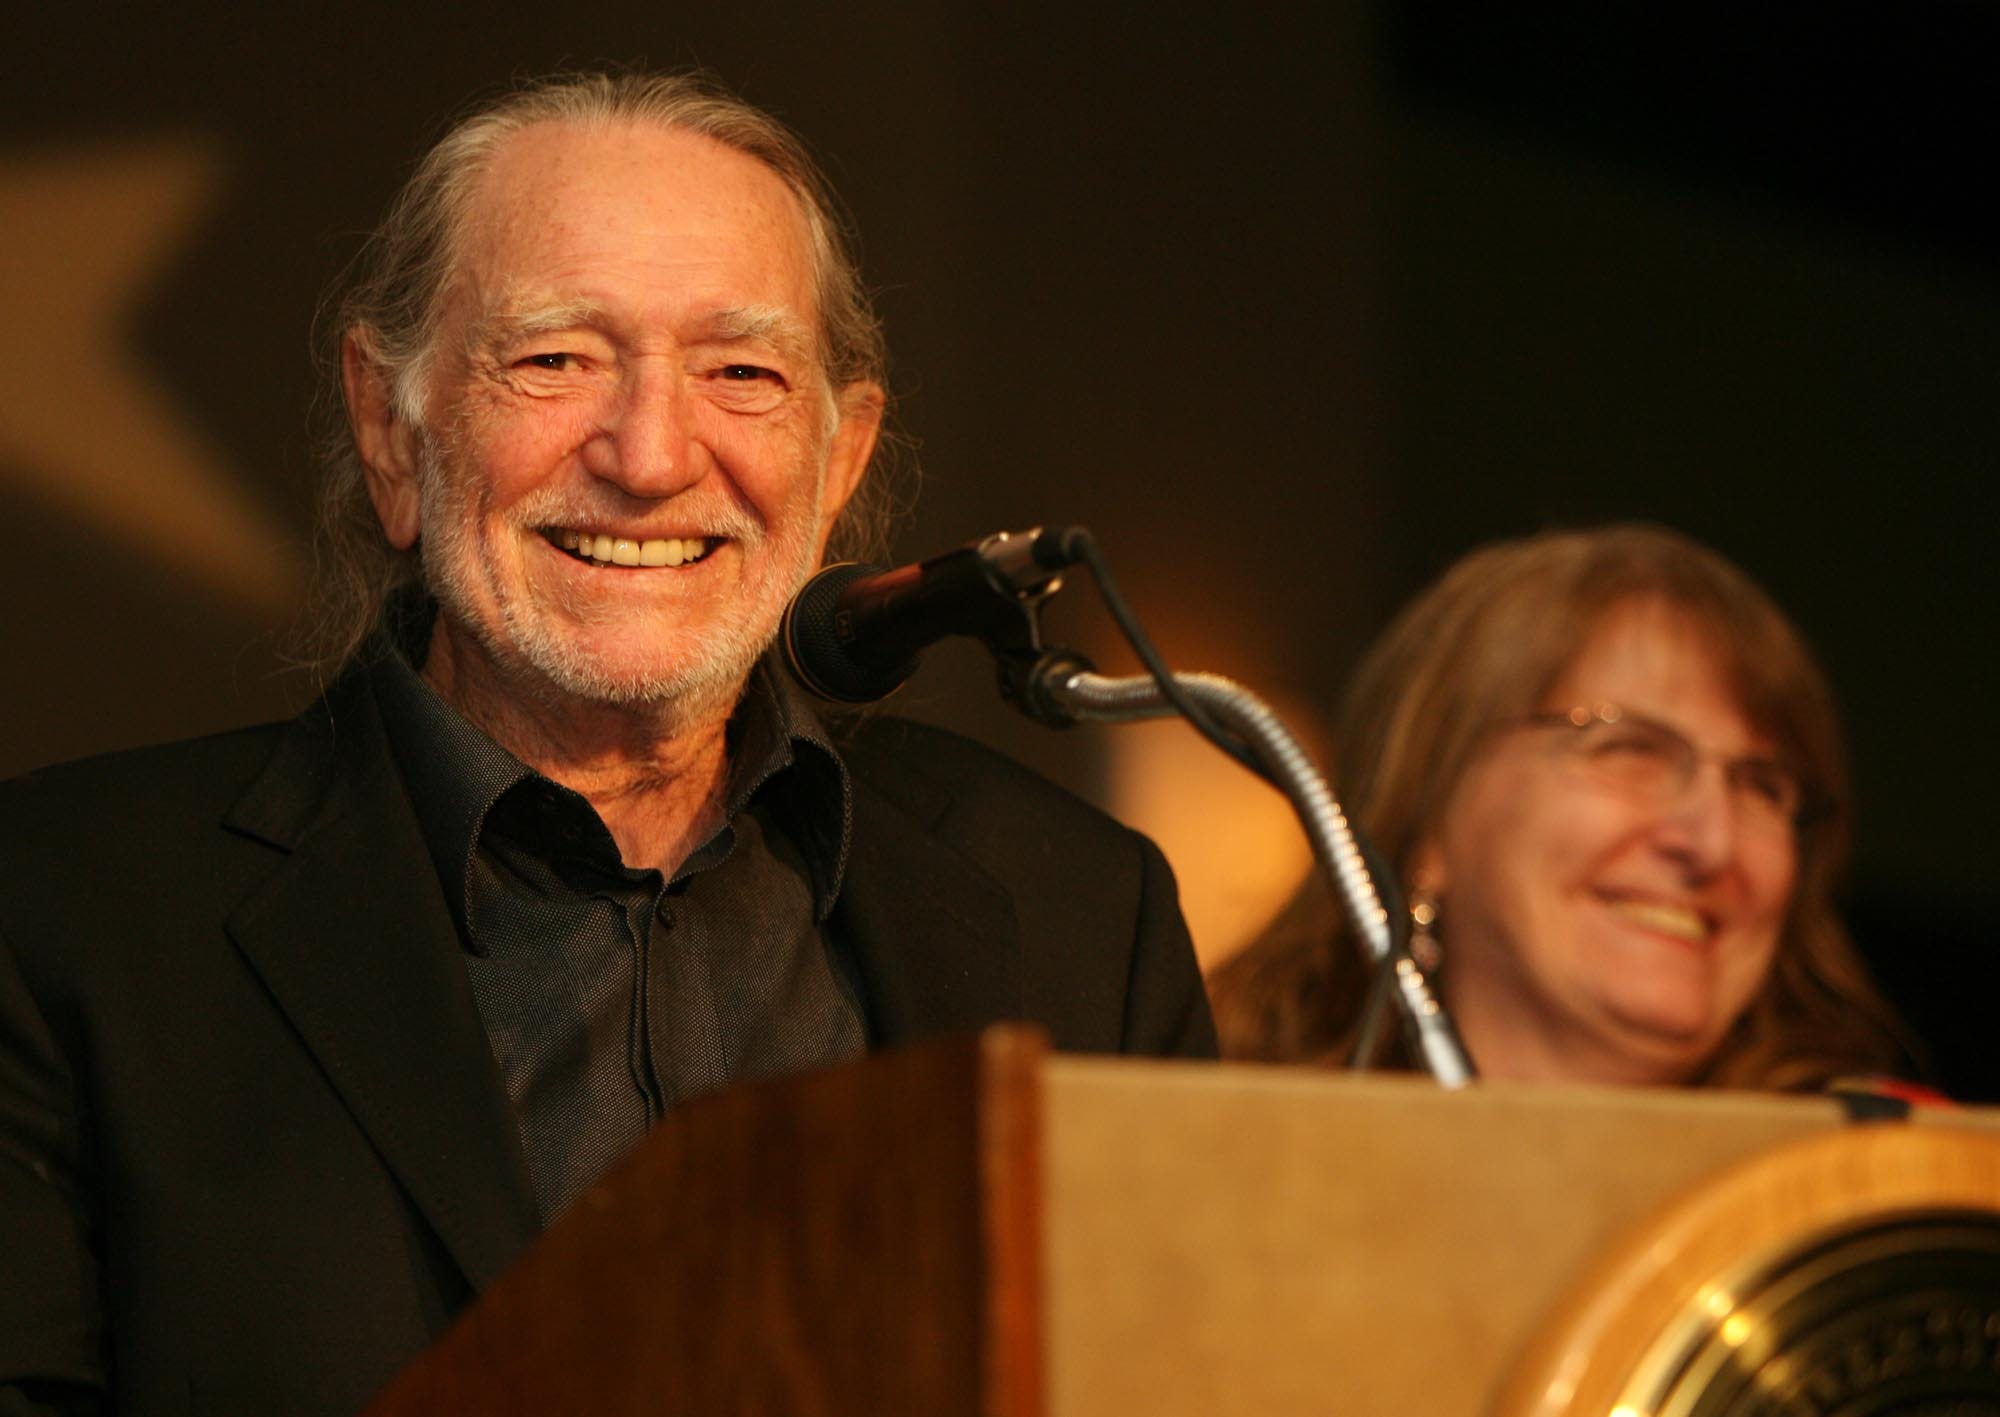 Willie Nelson accepts the Bridging Divides Award from UT's Project on Conflict Resolution given to him by Director Madeline Maxwell, right, at the Frank Erwin Center on Friday Oct. 19, 2007.